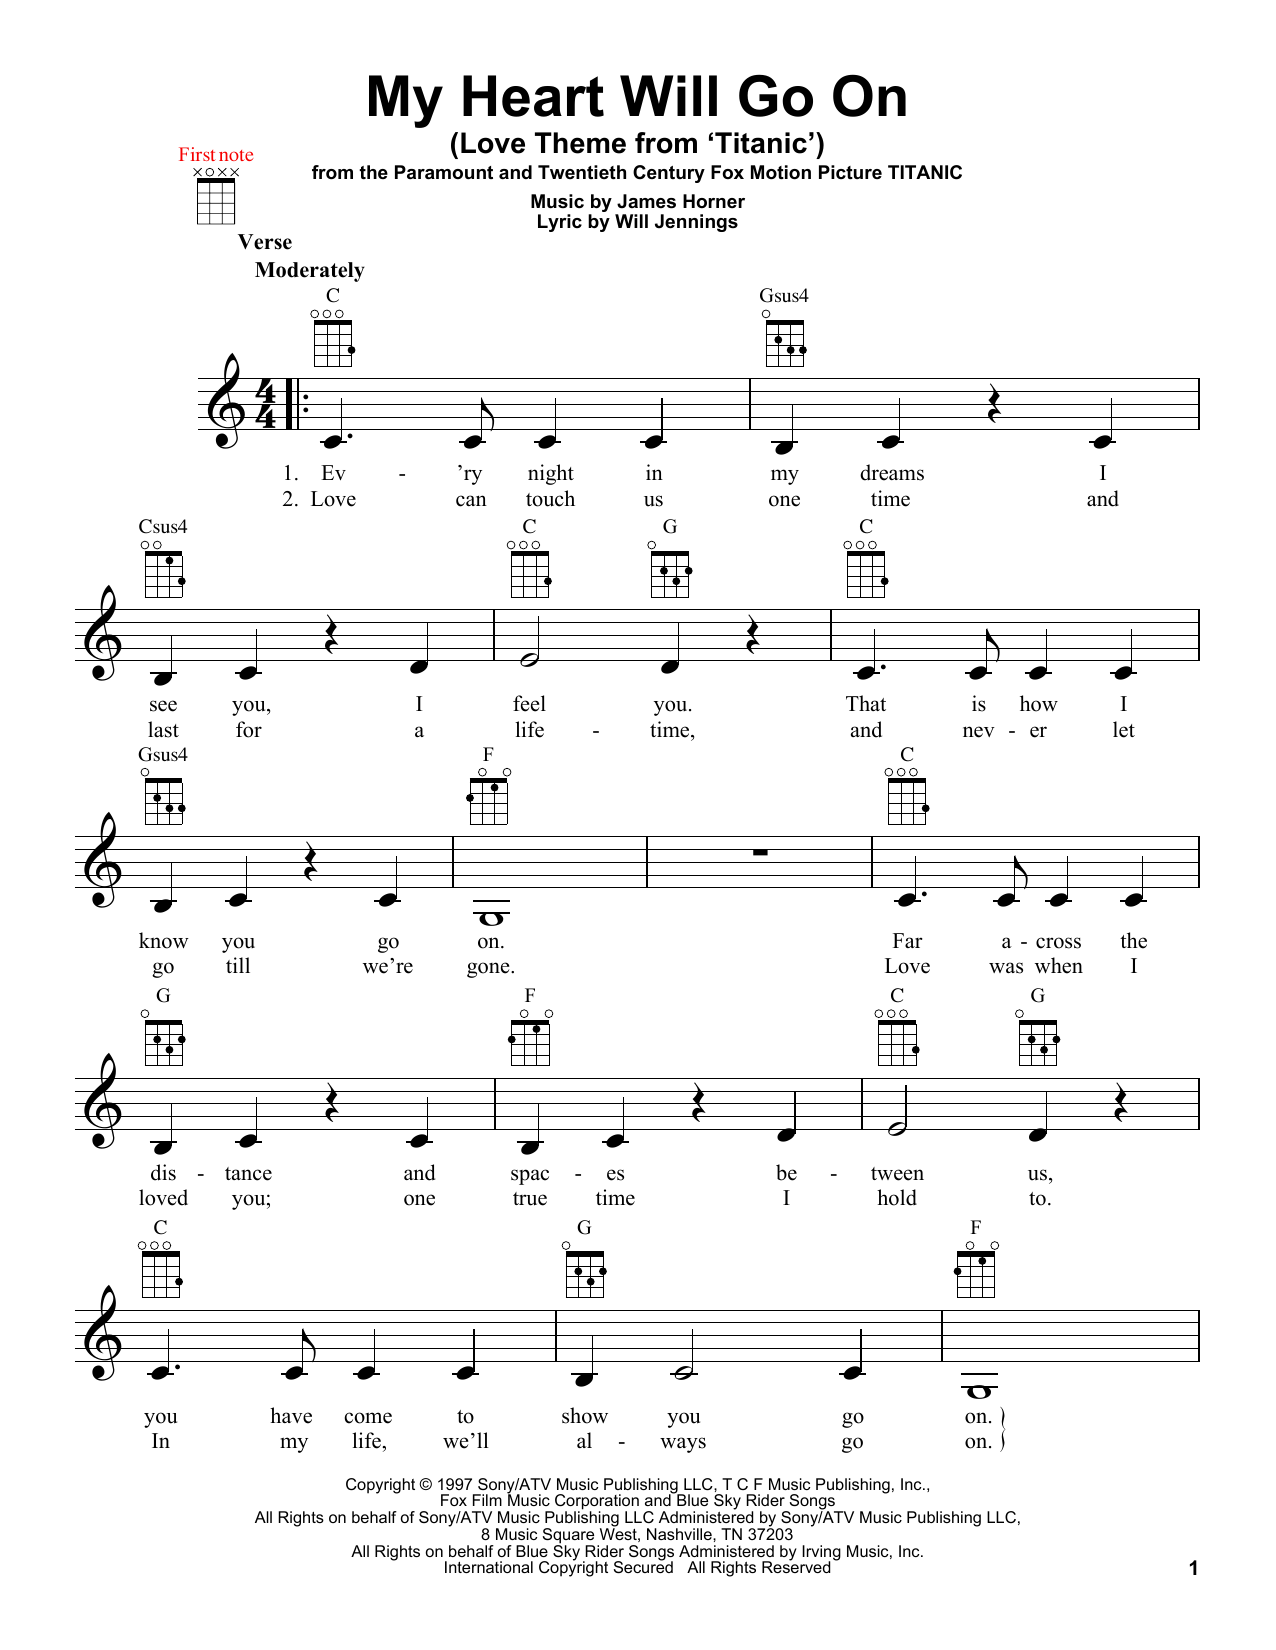 My Heart Will Go On (Love Theme From 'Titanic') sheet music